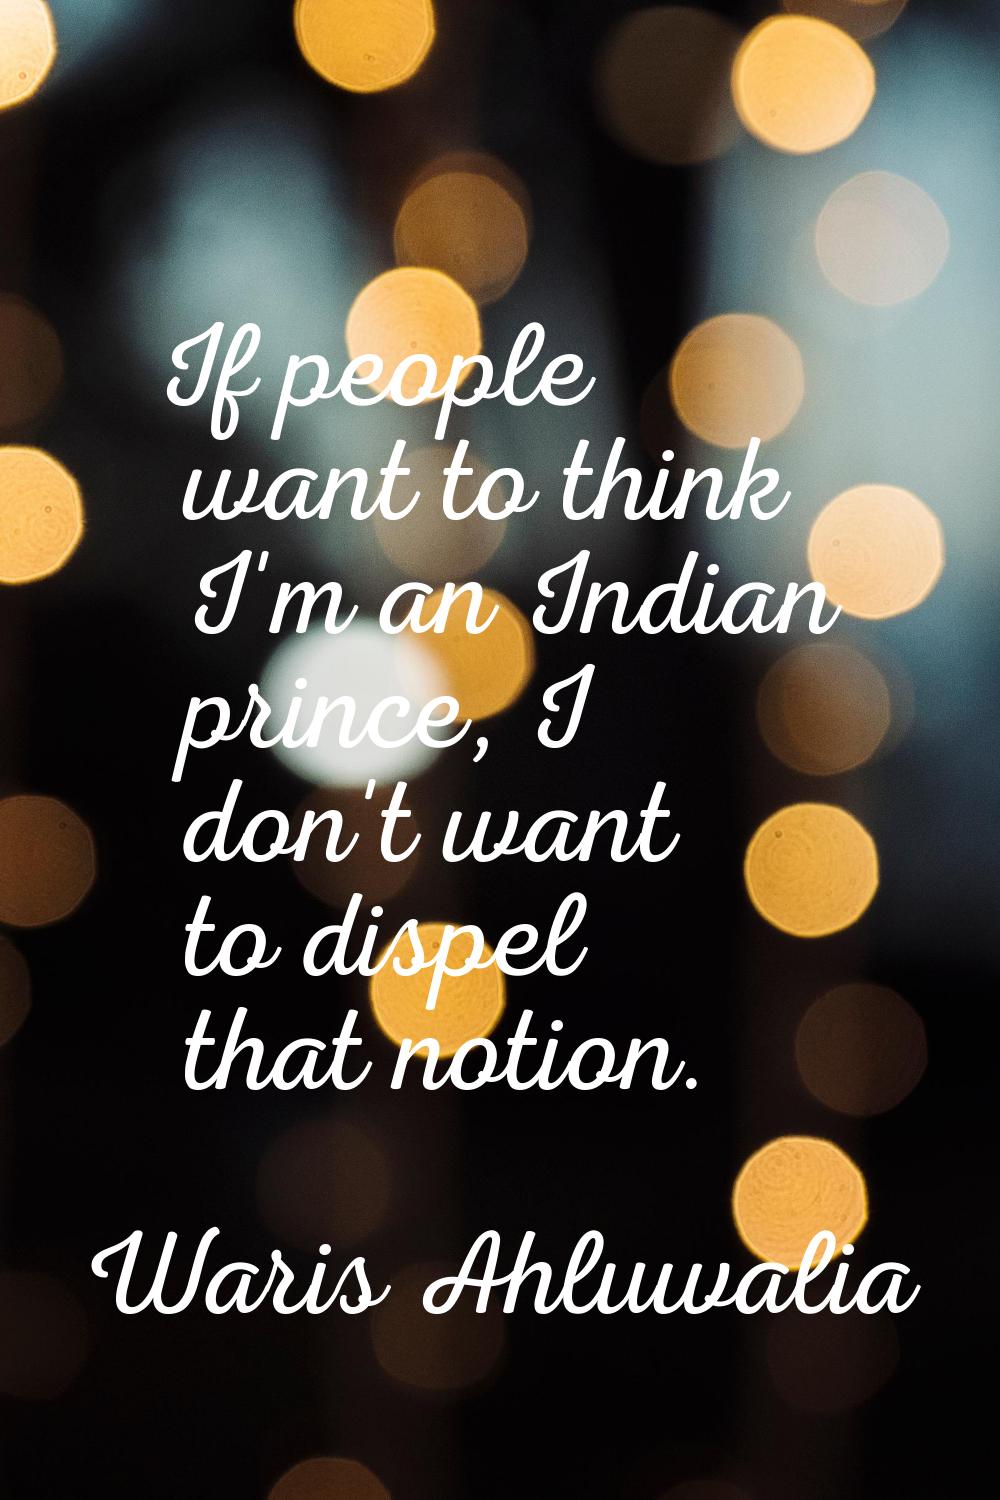 If people want to think I'm an Indian prince, I don't want to dispel that notion.